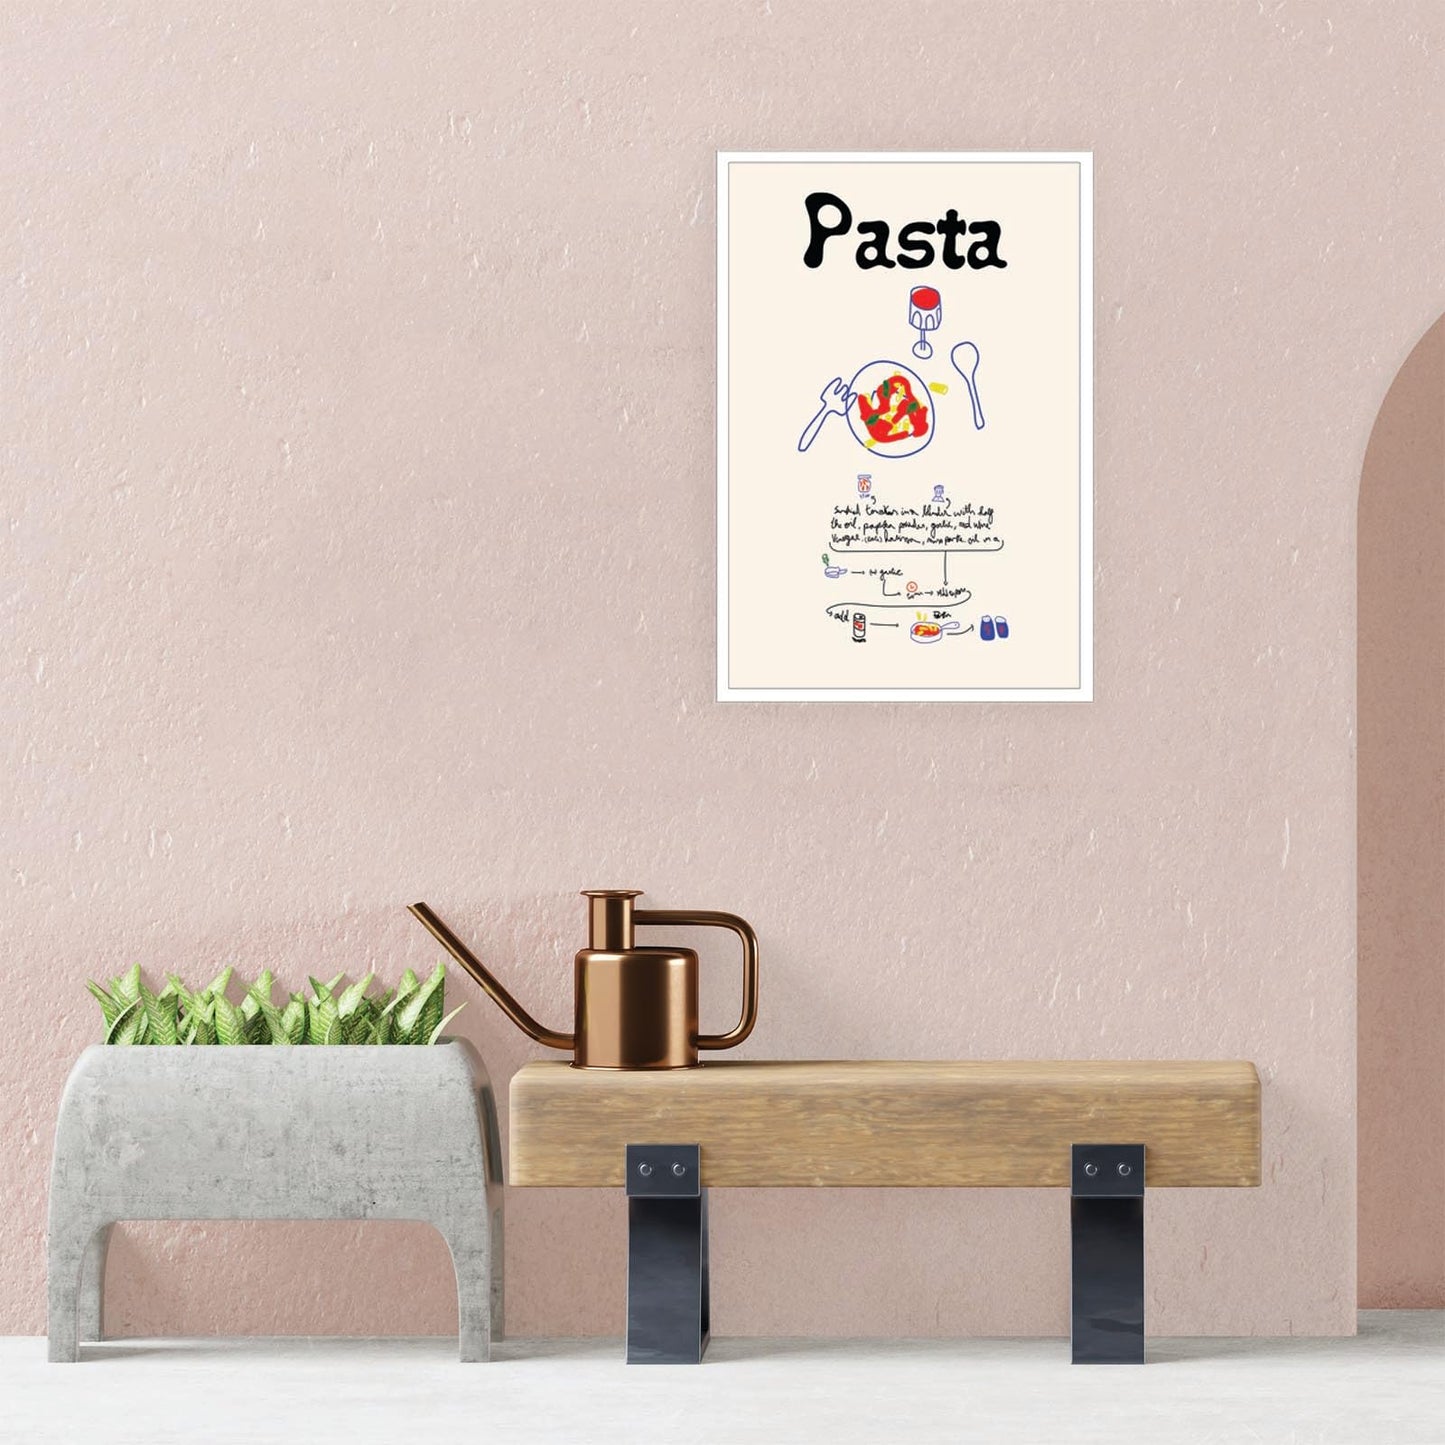 DVBOCS Retro Italy Pasta Decor Canvas Wall Art Vintage Food Print Painting Kitchen Knowledge Modern Painting Poster Suitable for Kitchen Restaurant Cafe Gourmet Illustration Decor 12x16in Unframed